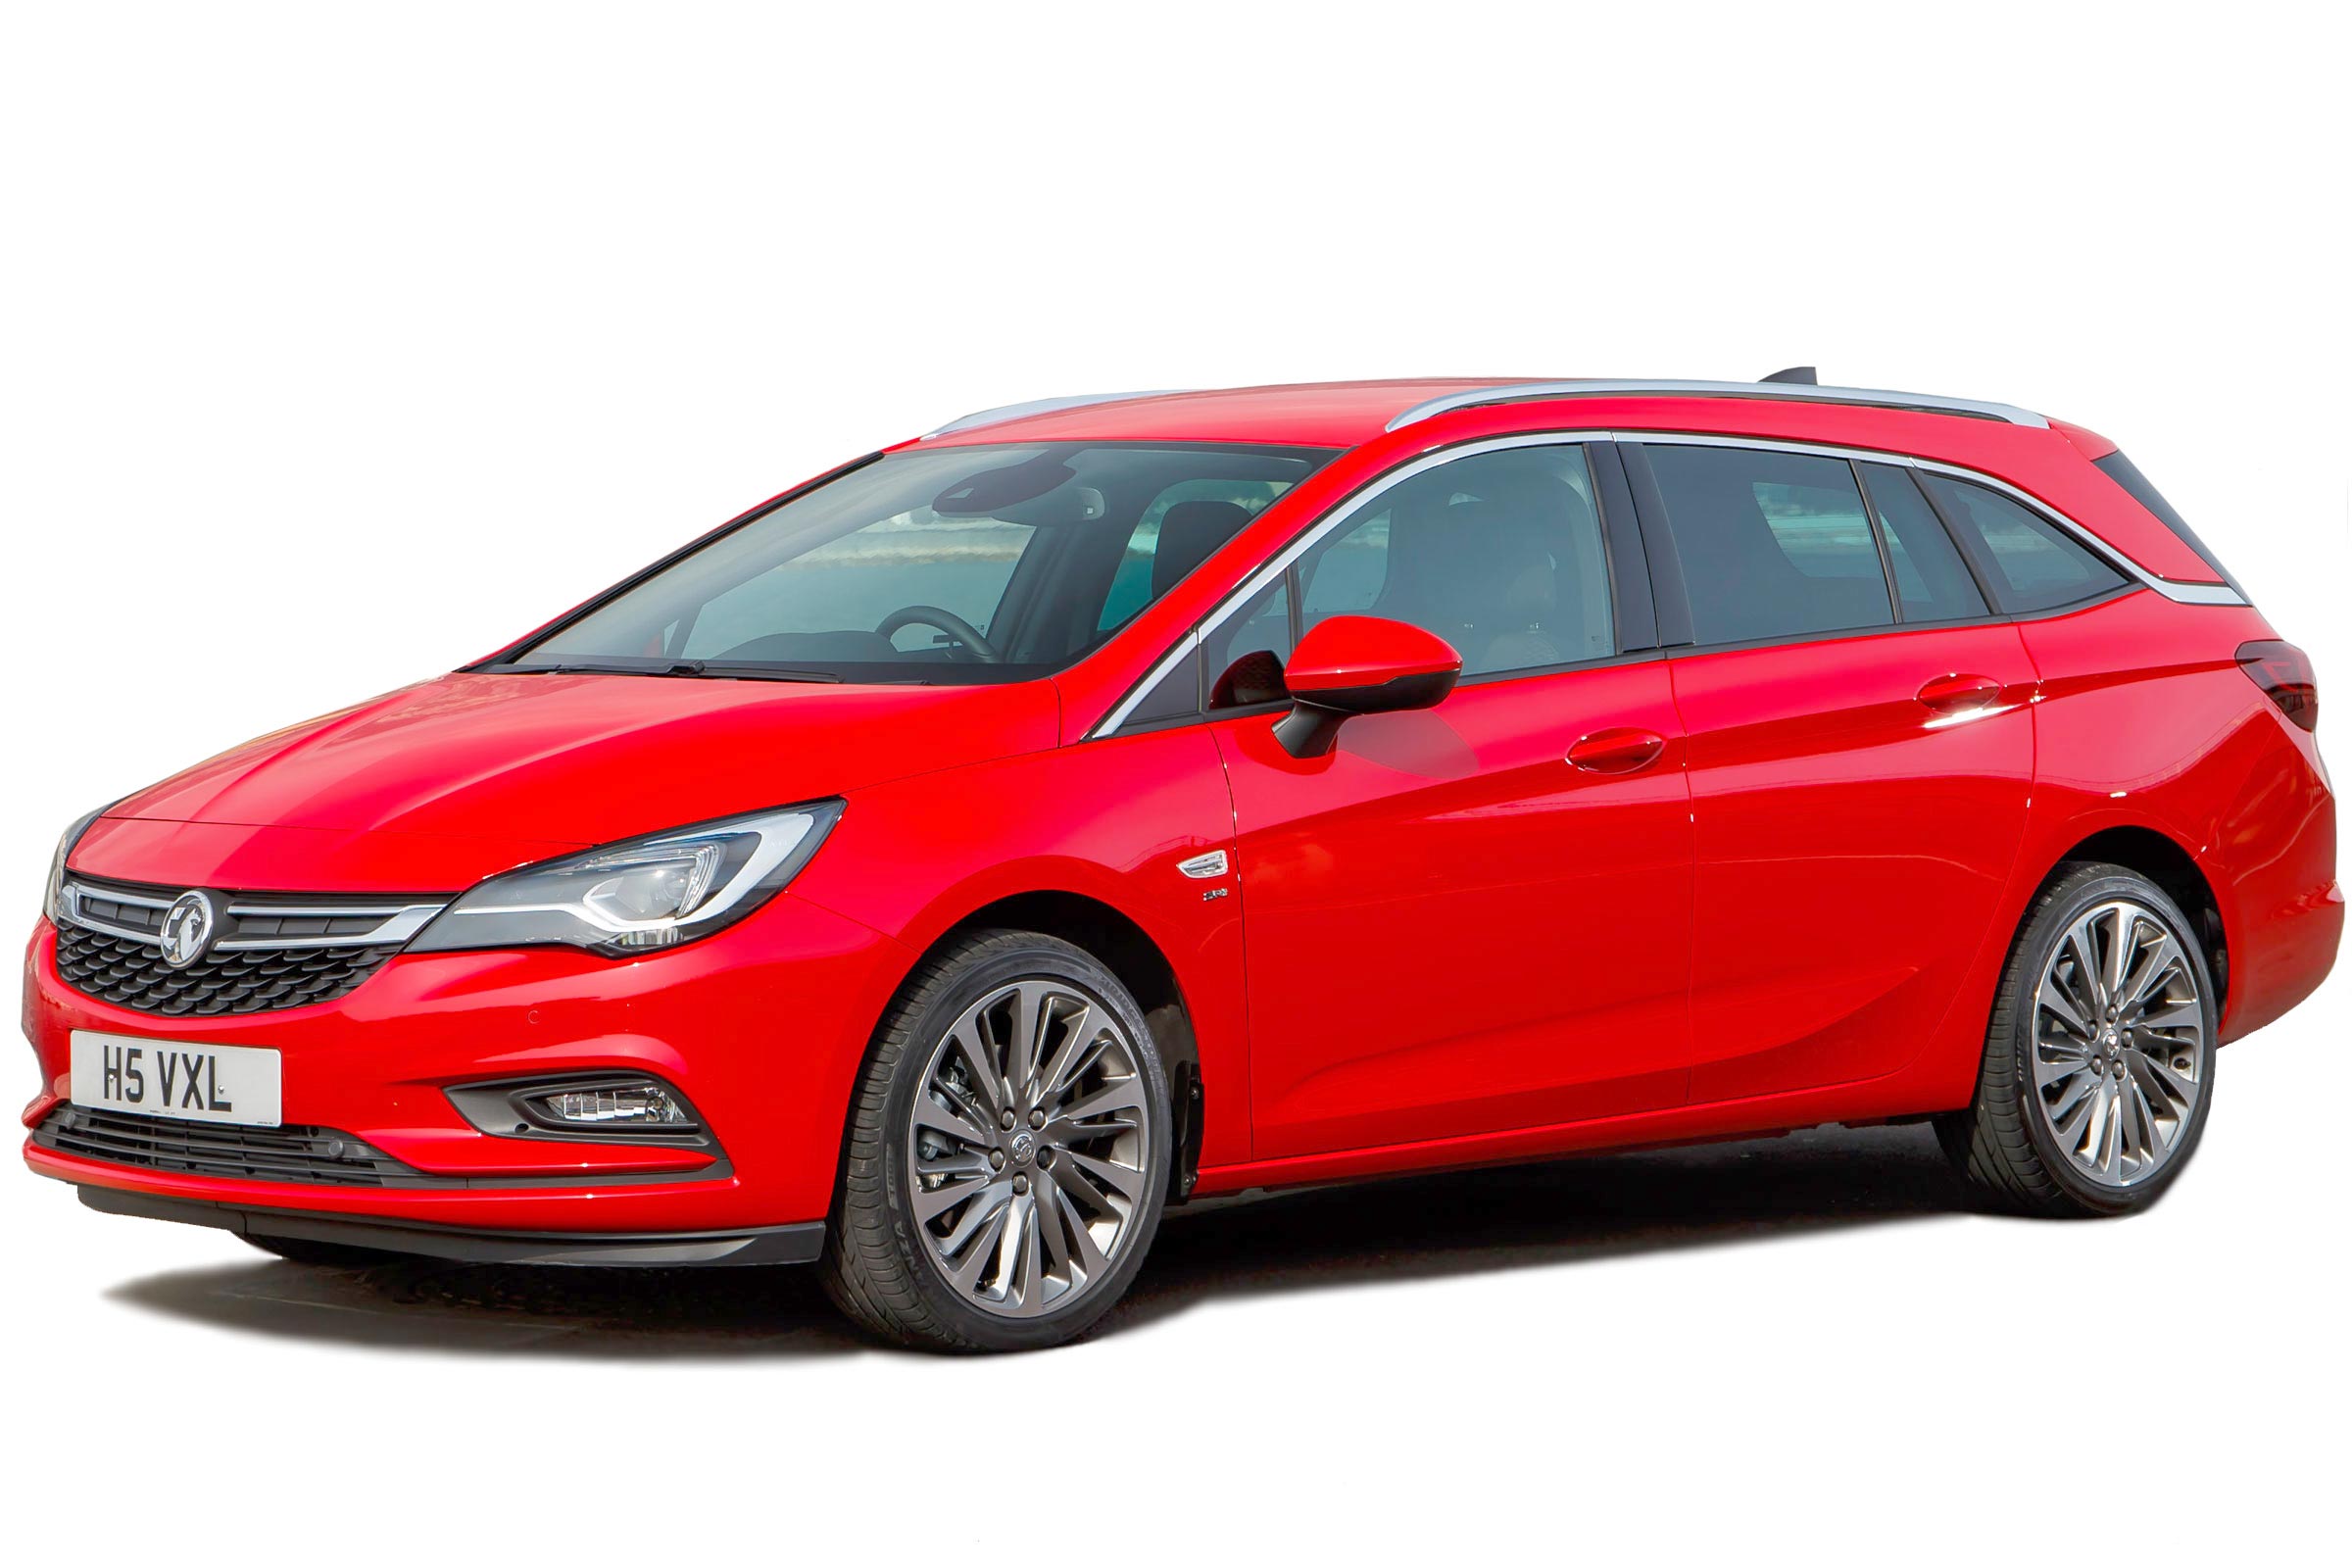 Vauxhall Astra Sports Tourer Estate Review Carbuyer